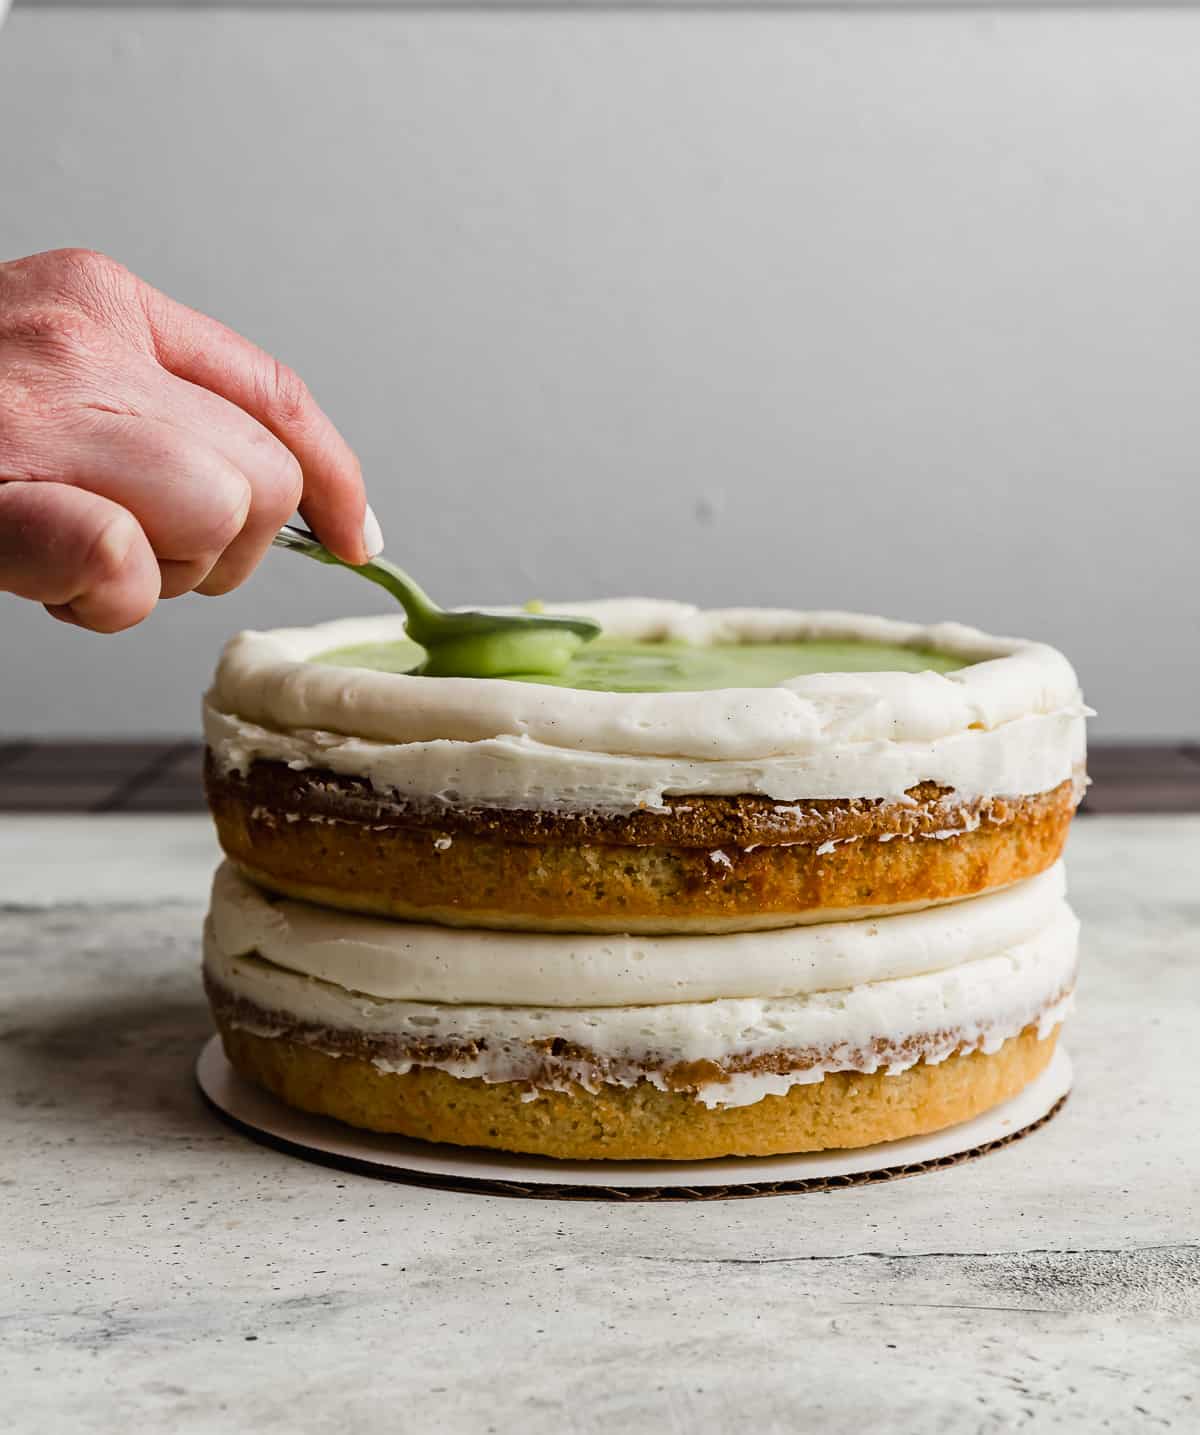 A spoon spreading a light green key lime curd filling on top of a two tiered key lime pie cake.